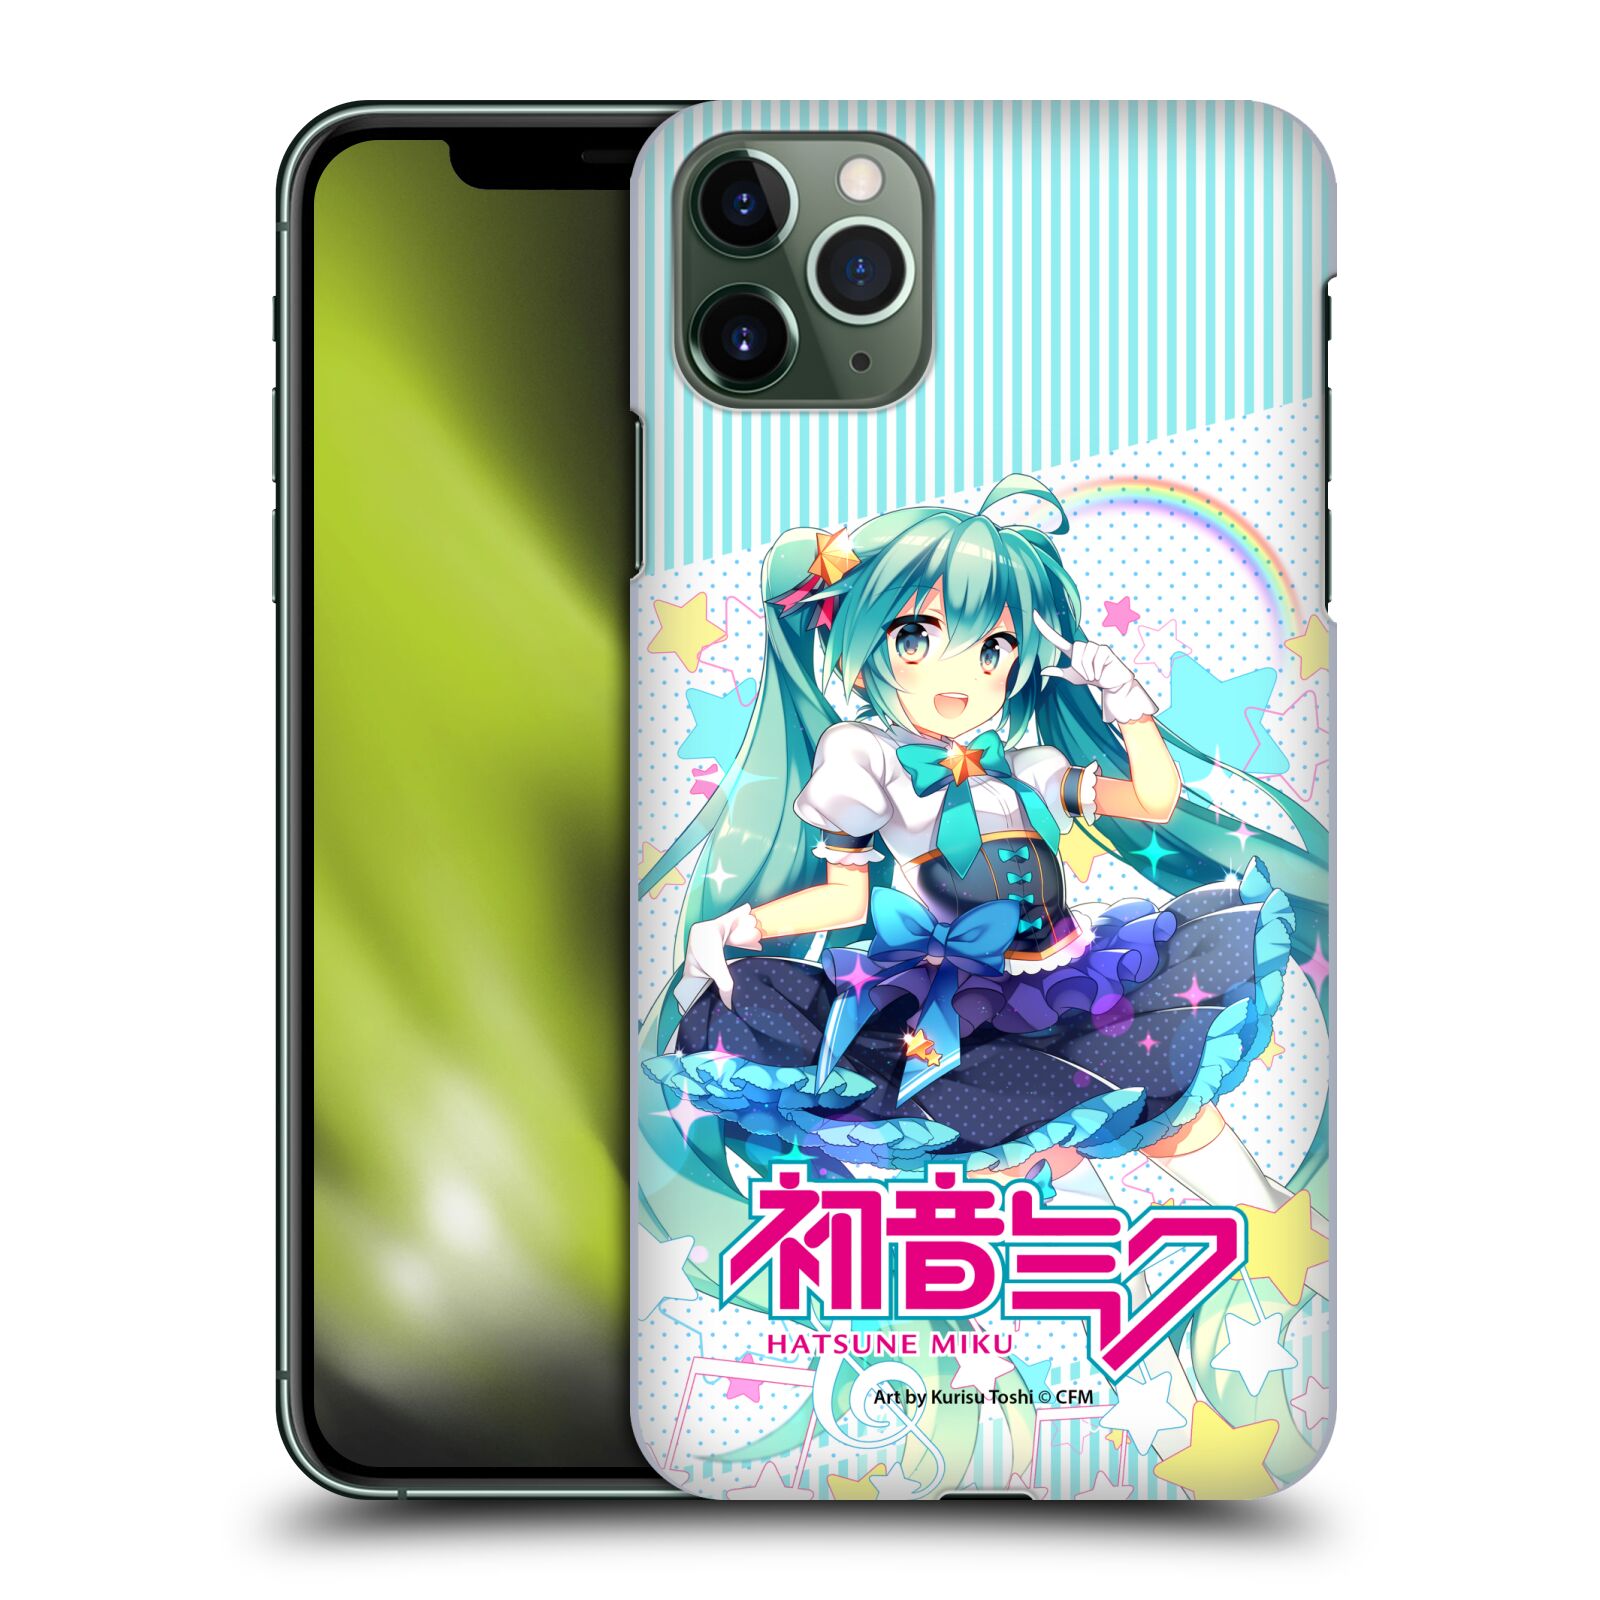 OFFICIAL HATSUNE MIKU GRAPHICS HARD BACK CASE FOR APPLE iPHONE PHONES